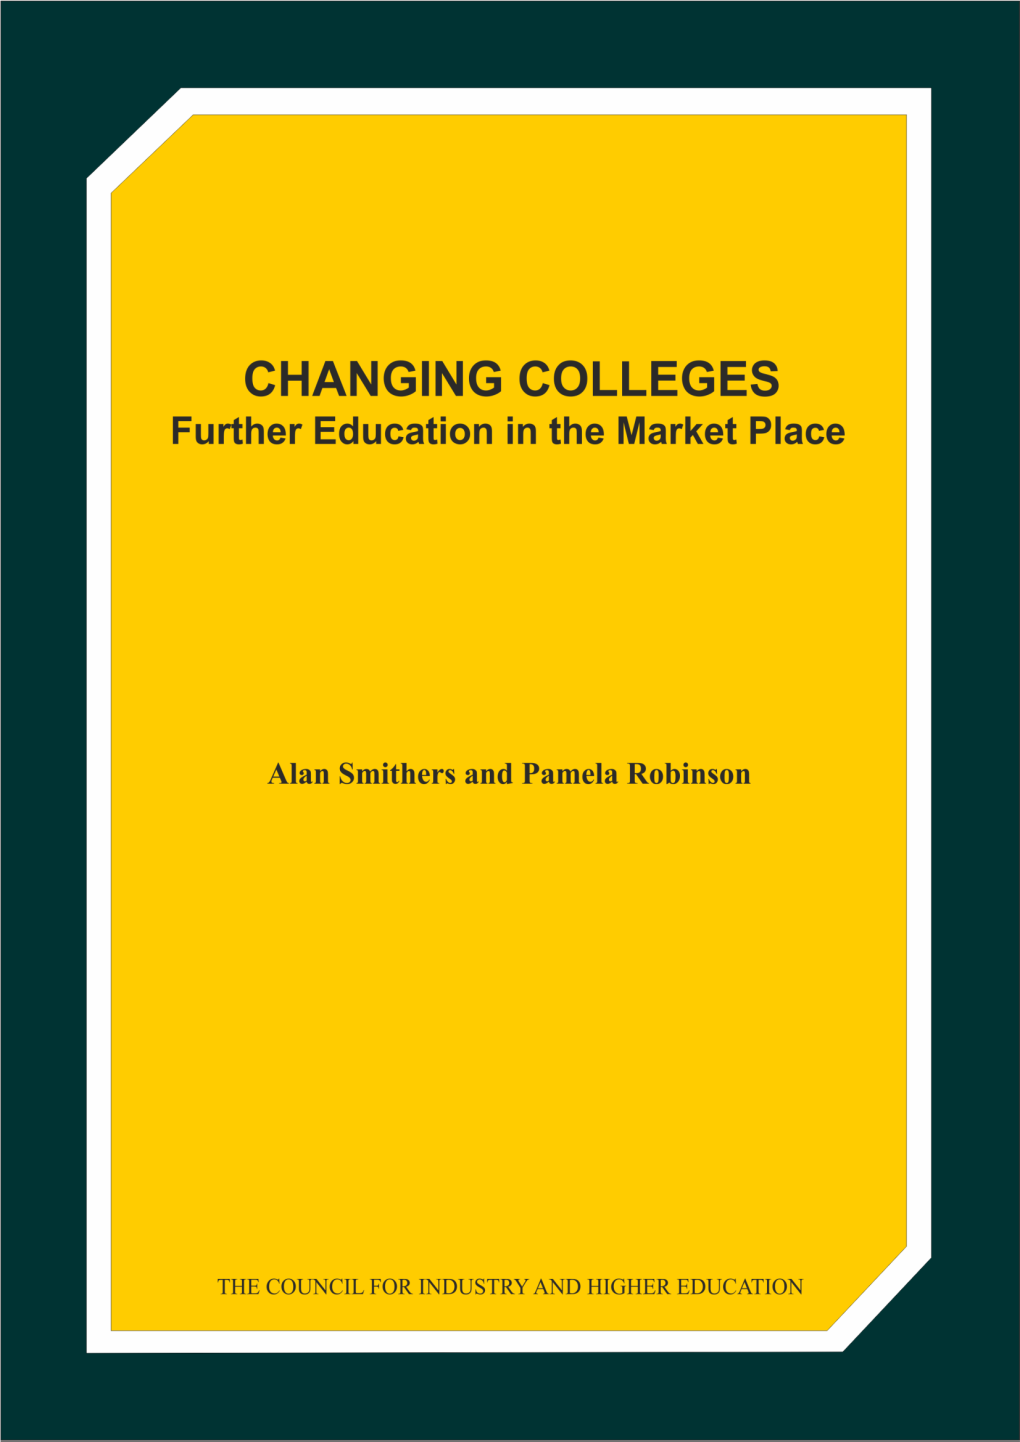 Changing Colleges: Further Education in the Market Place Celebrates Achievements and Assesses Prospects